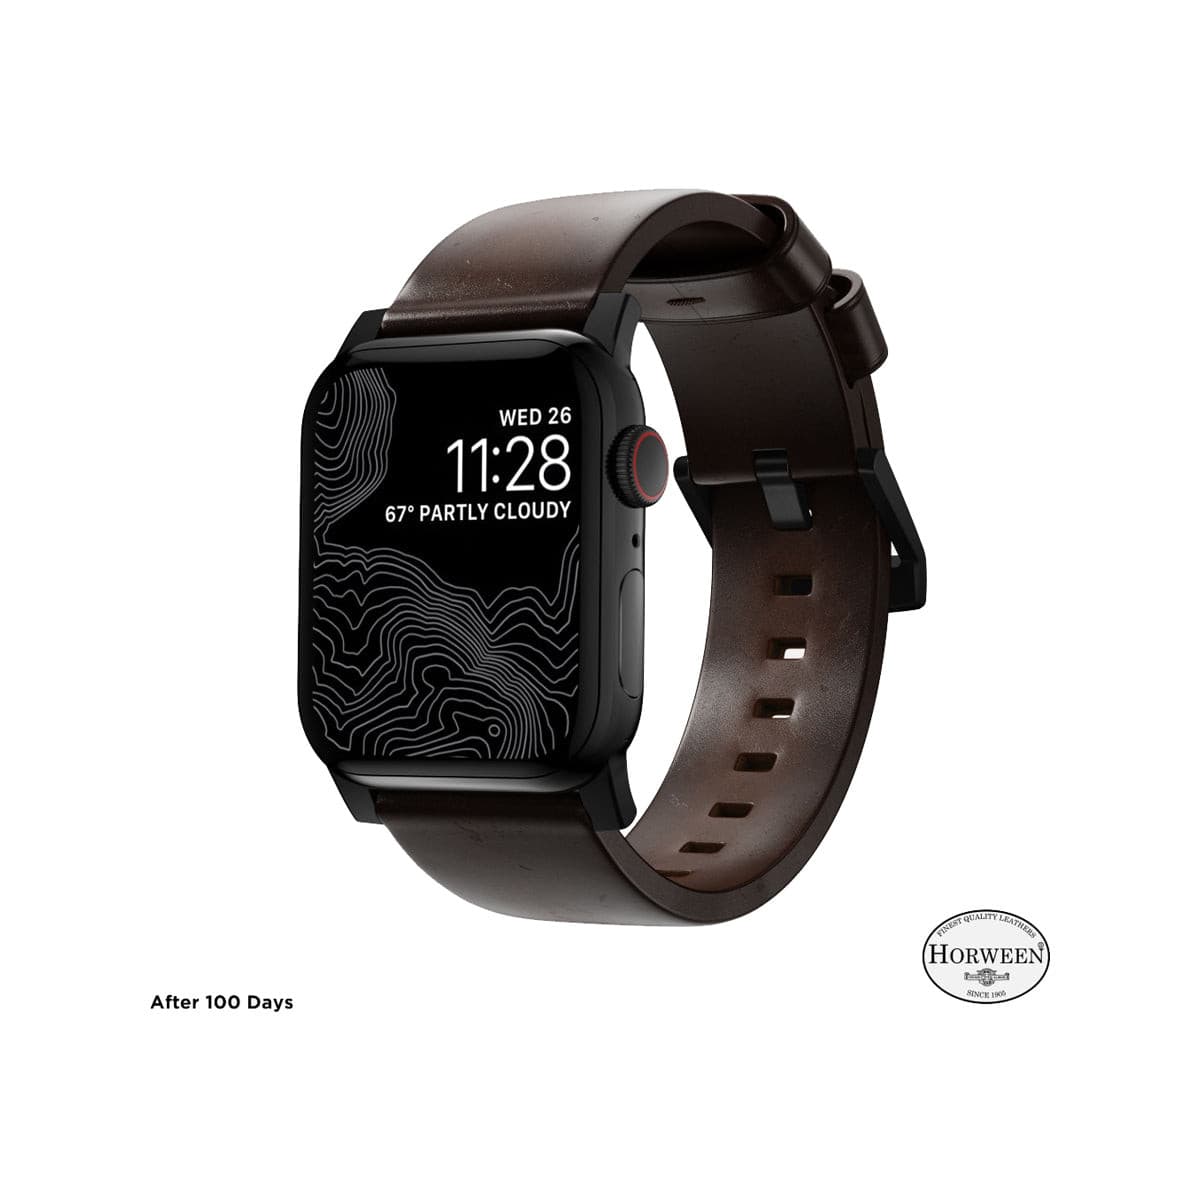 Nomad Modern Band for Apple Watch 41mm - Black Hardware with Rustic Brown Horween Leather.